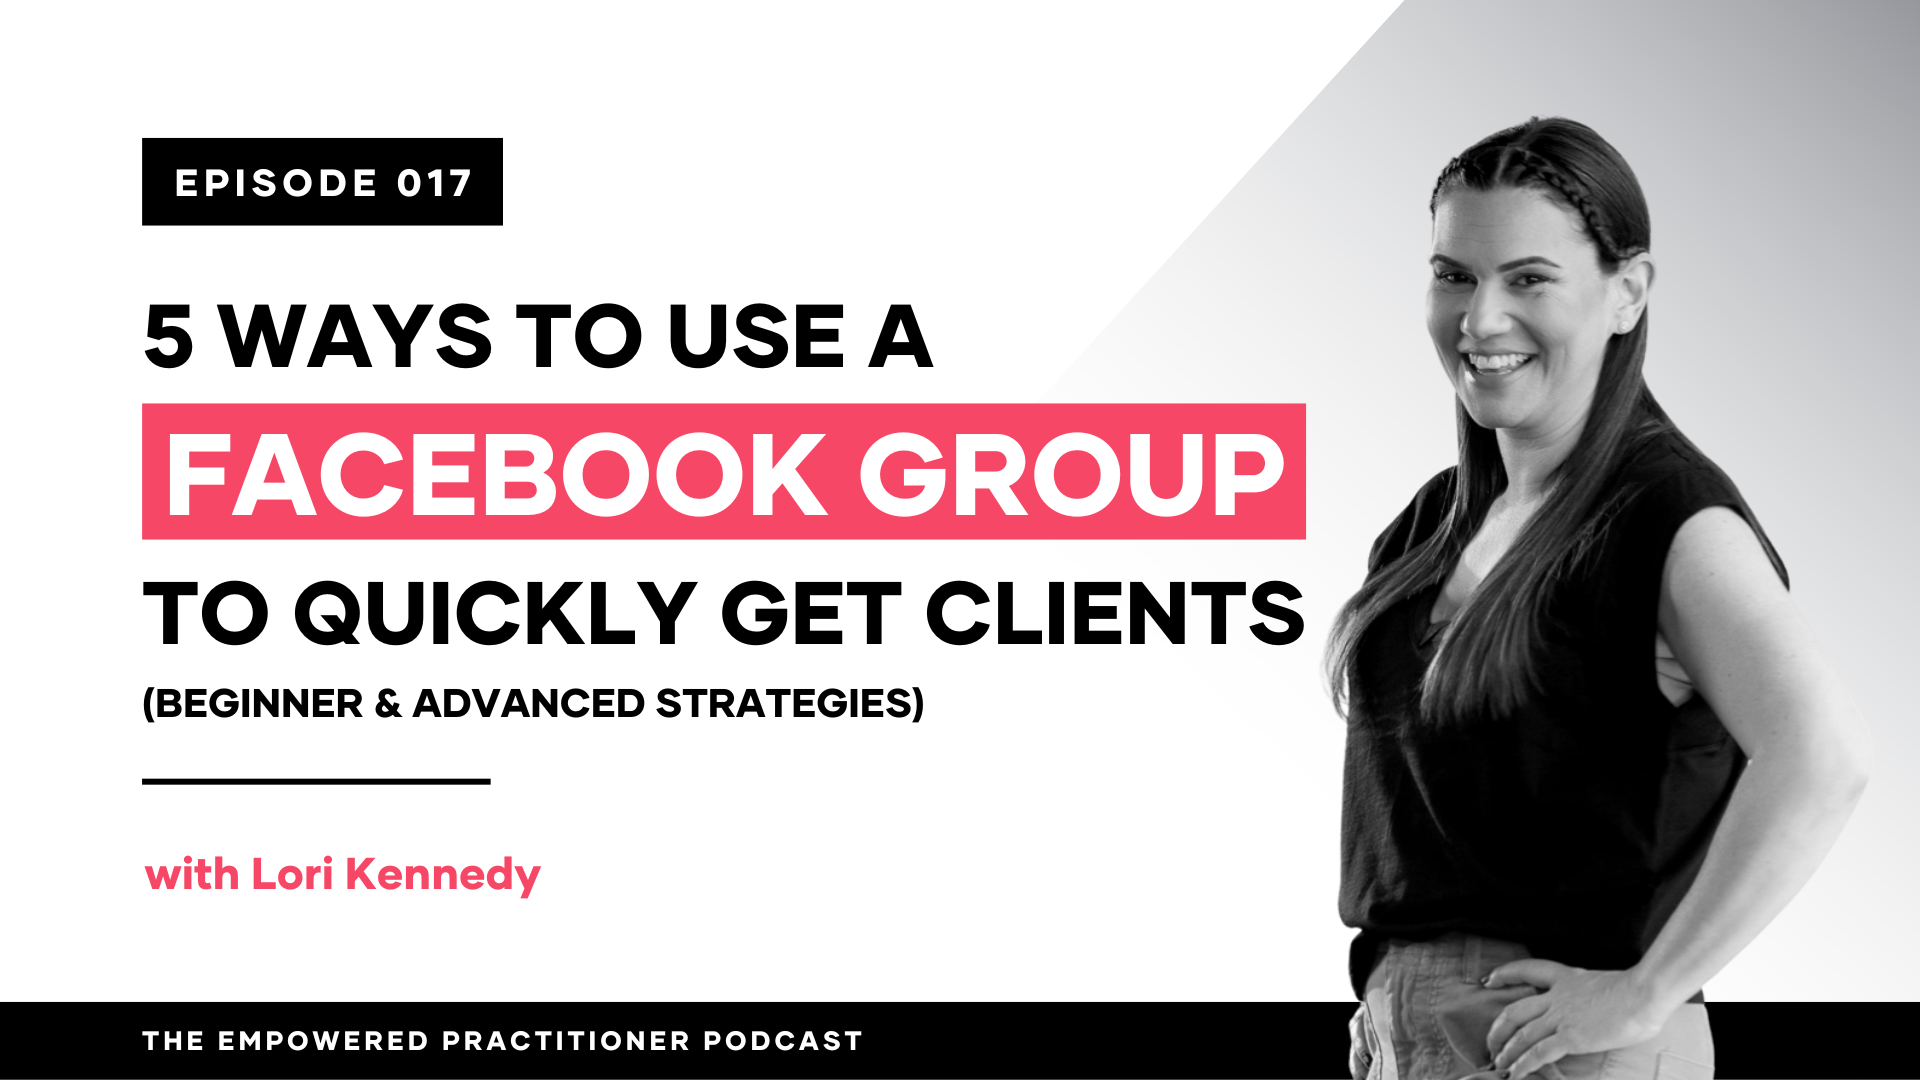 5 Ways To Use A Facebook Group To Quickly Get Clients -(Beginner & Advanced Strategies)